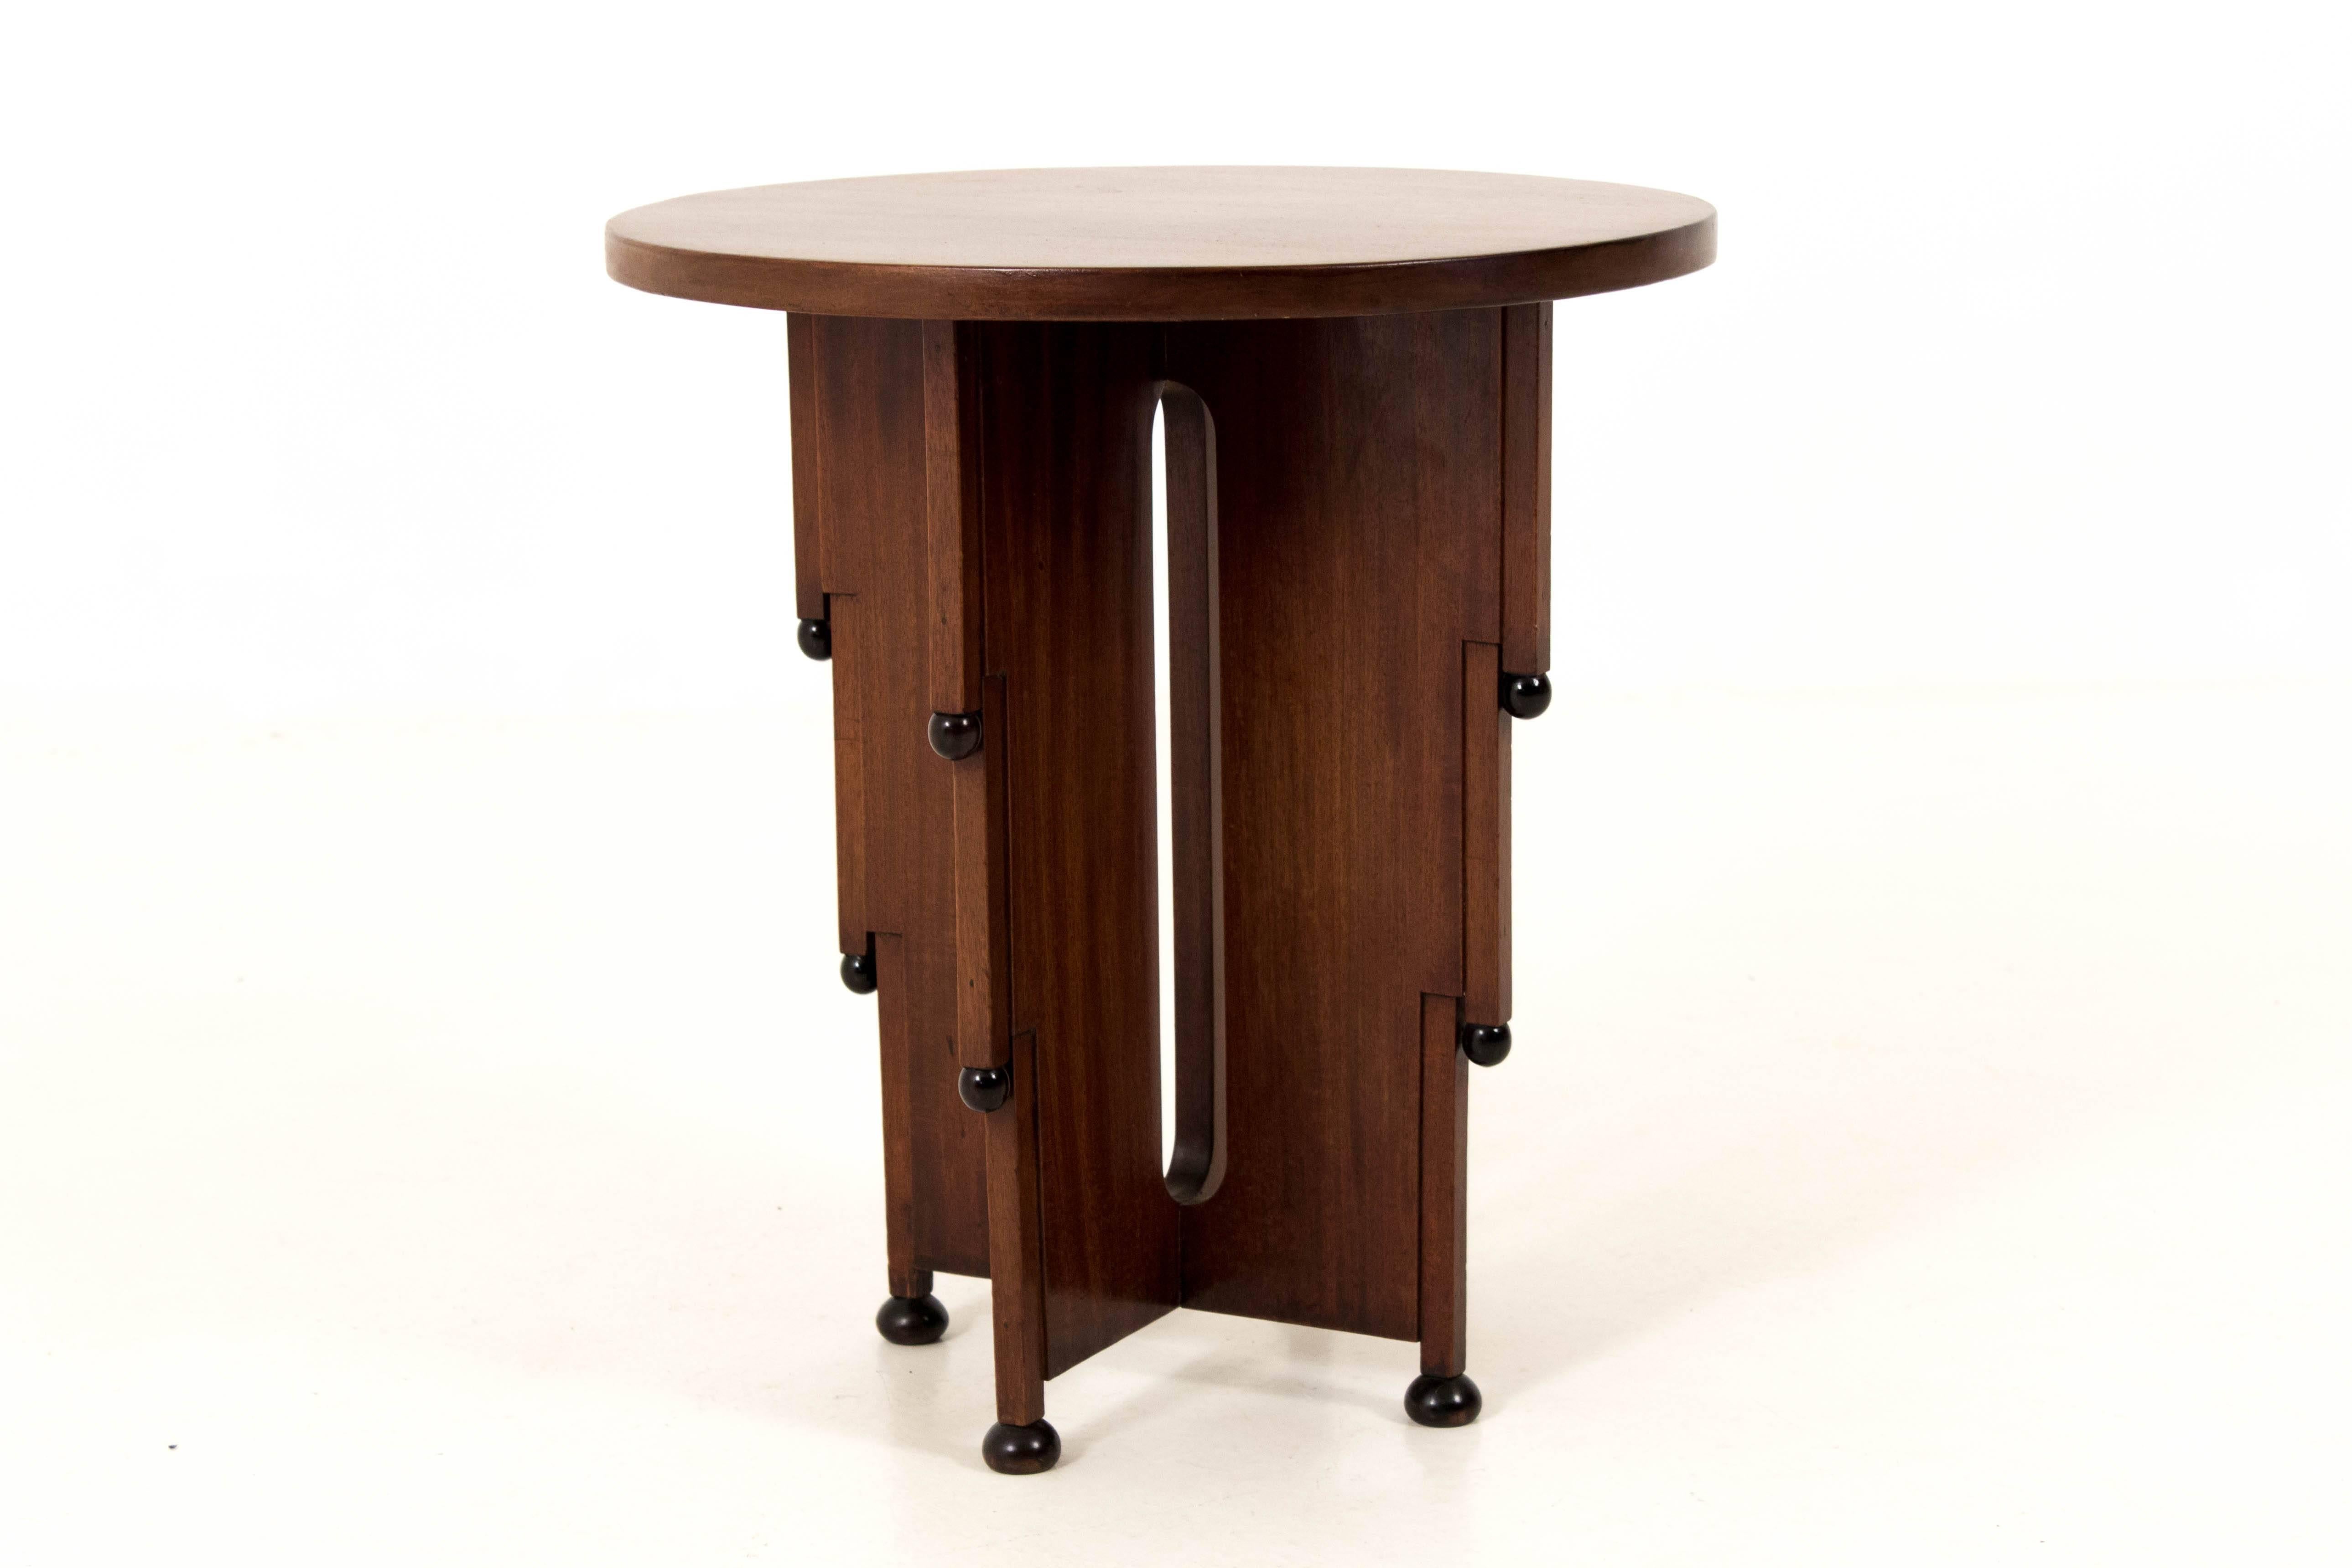 Stunning Art Deco Amsterdam School occasional table 1920s.
Mahogany with ebonized details.
In good original condition.